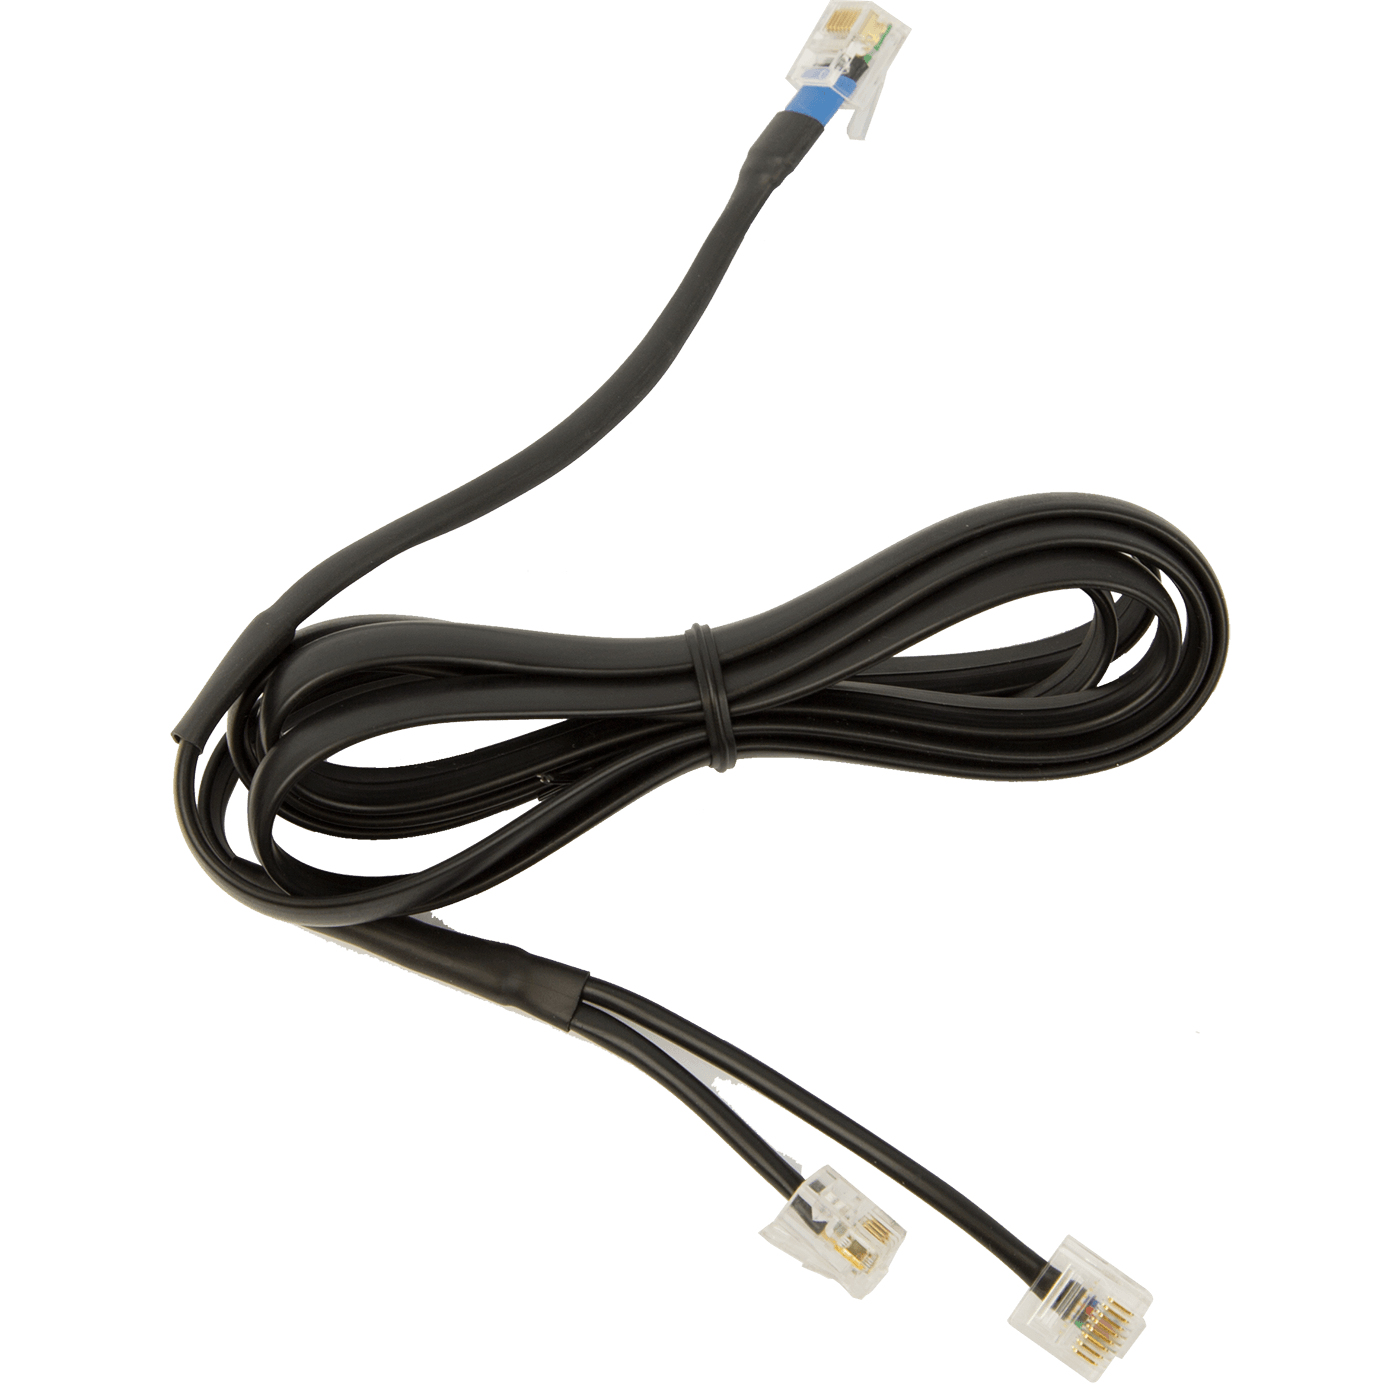 Photos - Cable (video, audio, USB) Jabra DHSG cable 14201-10 